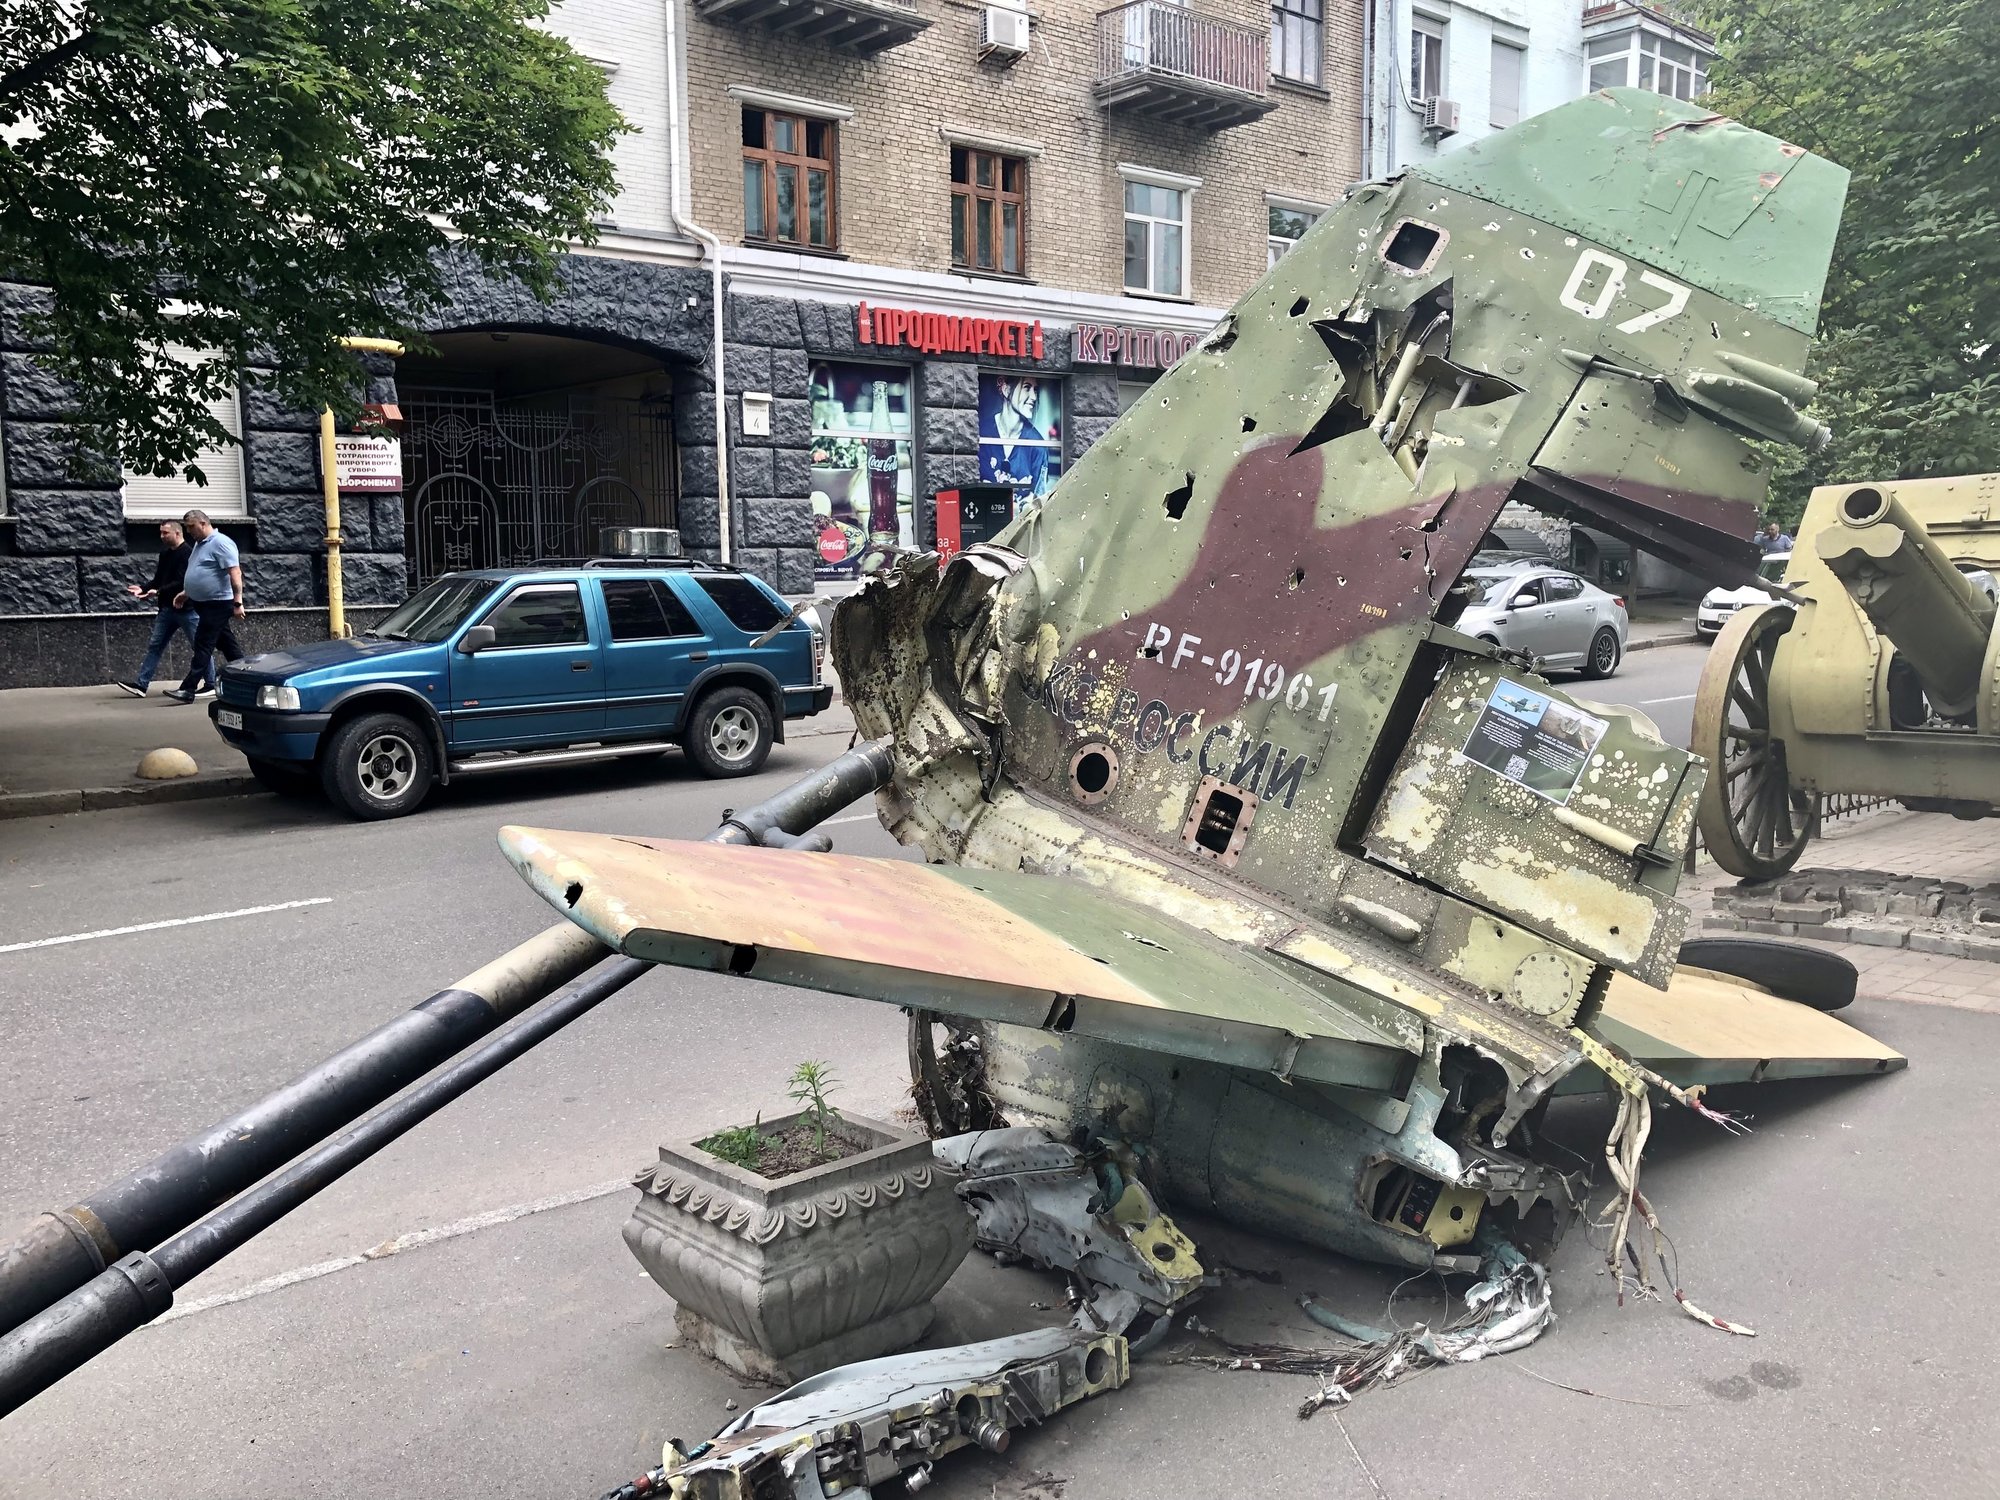 The tail section of a downed Russian Su-25 attack plane on display in central Kyiv. Photo by Nolan Peterson/Coffee or Die Magazine.